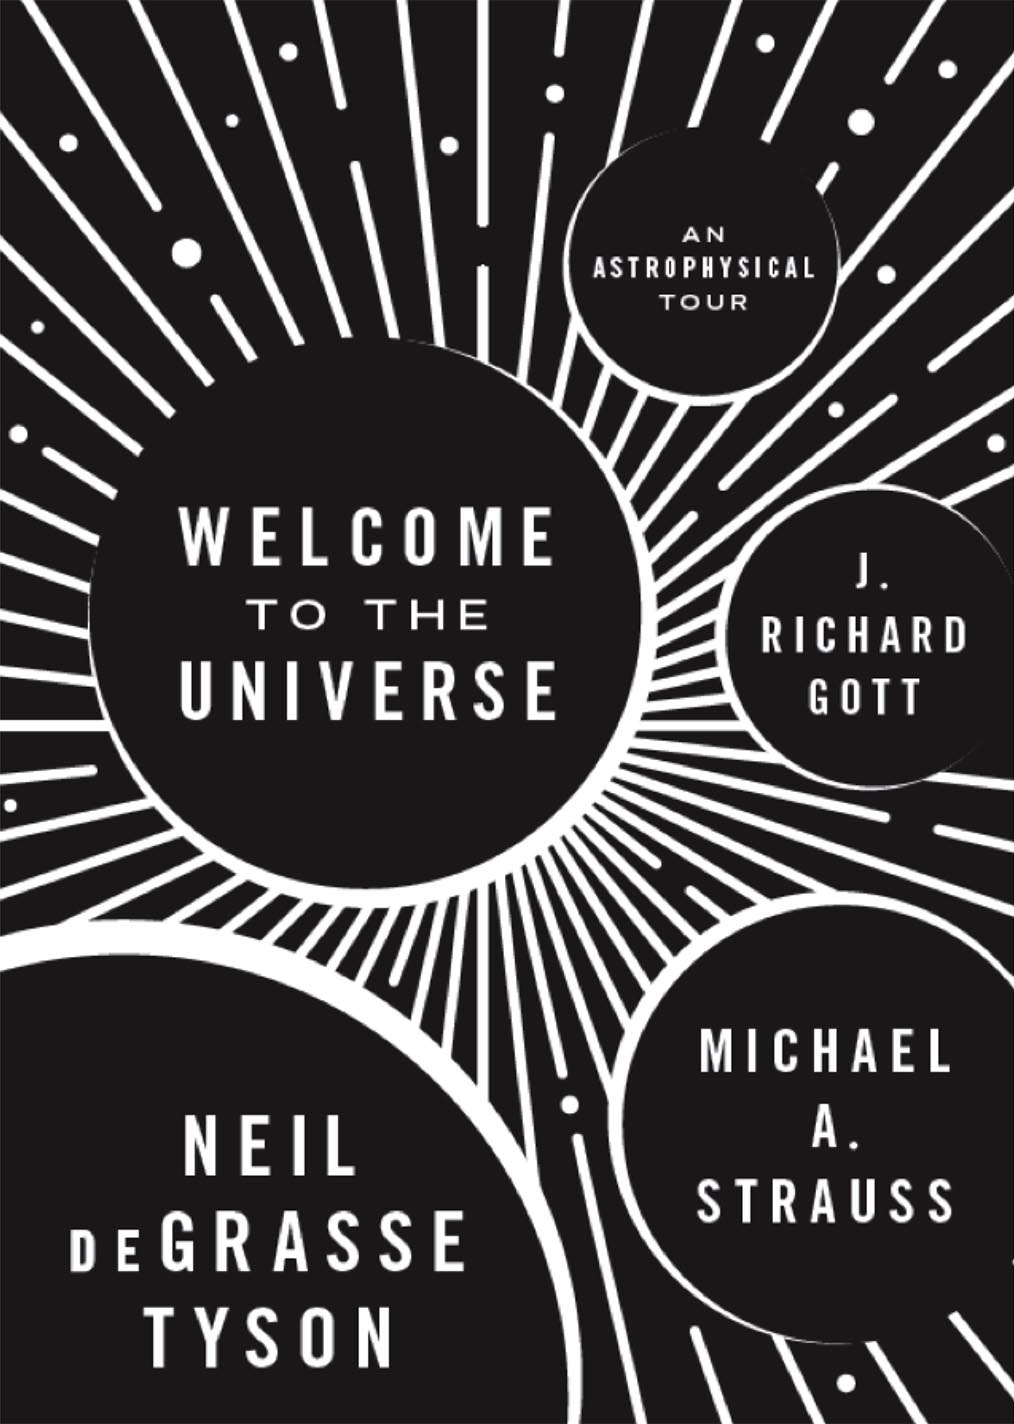 Link to the book Welcome to the Universe by Neil deGrasse Tyson, Michael Strauss, and J. Richard Gott.